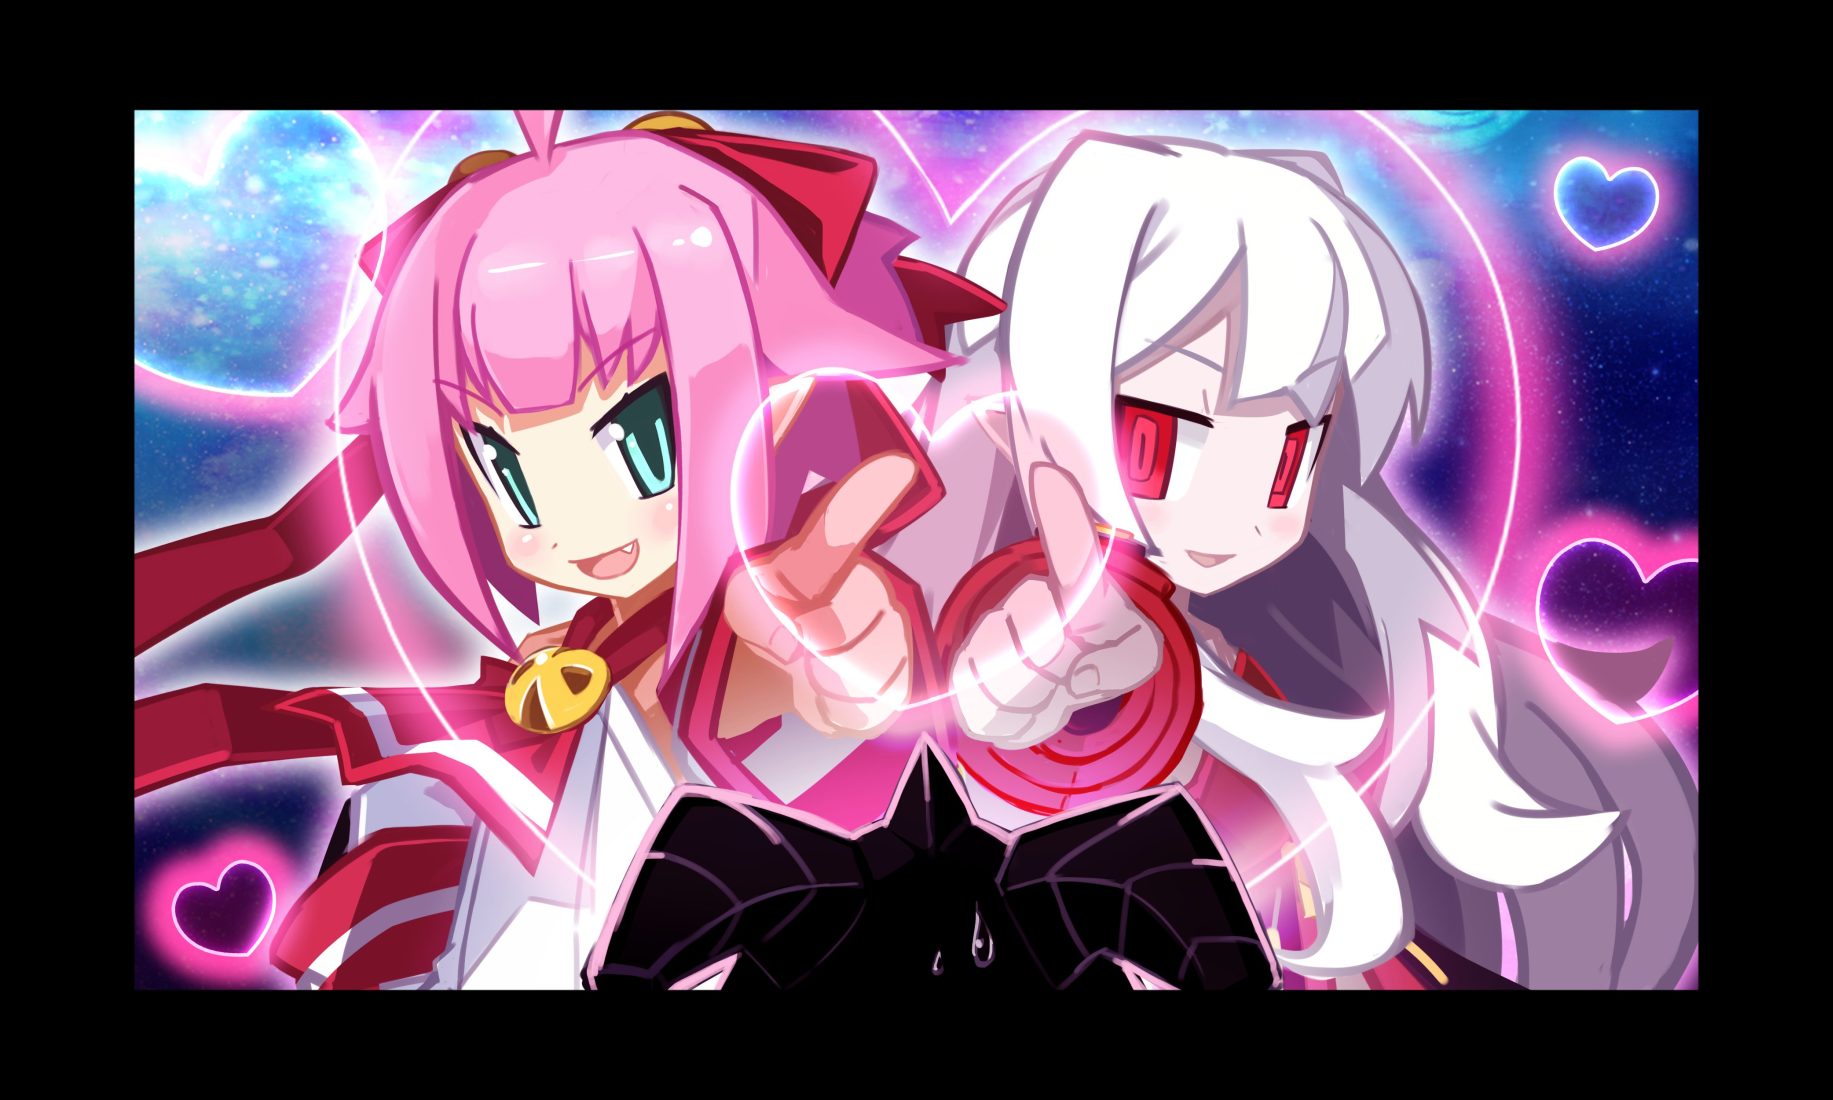 Animated Blowjob Toddlercon - Mugen Souls coming to PC via Steam - Gematsu